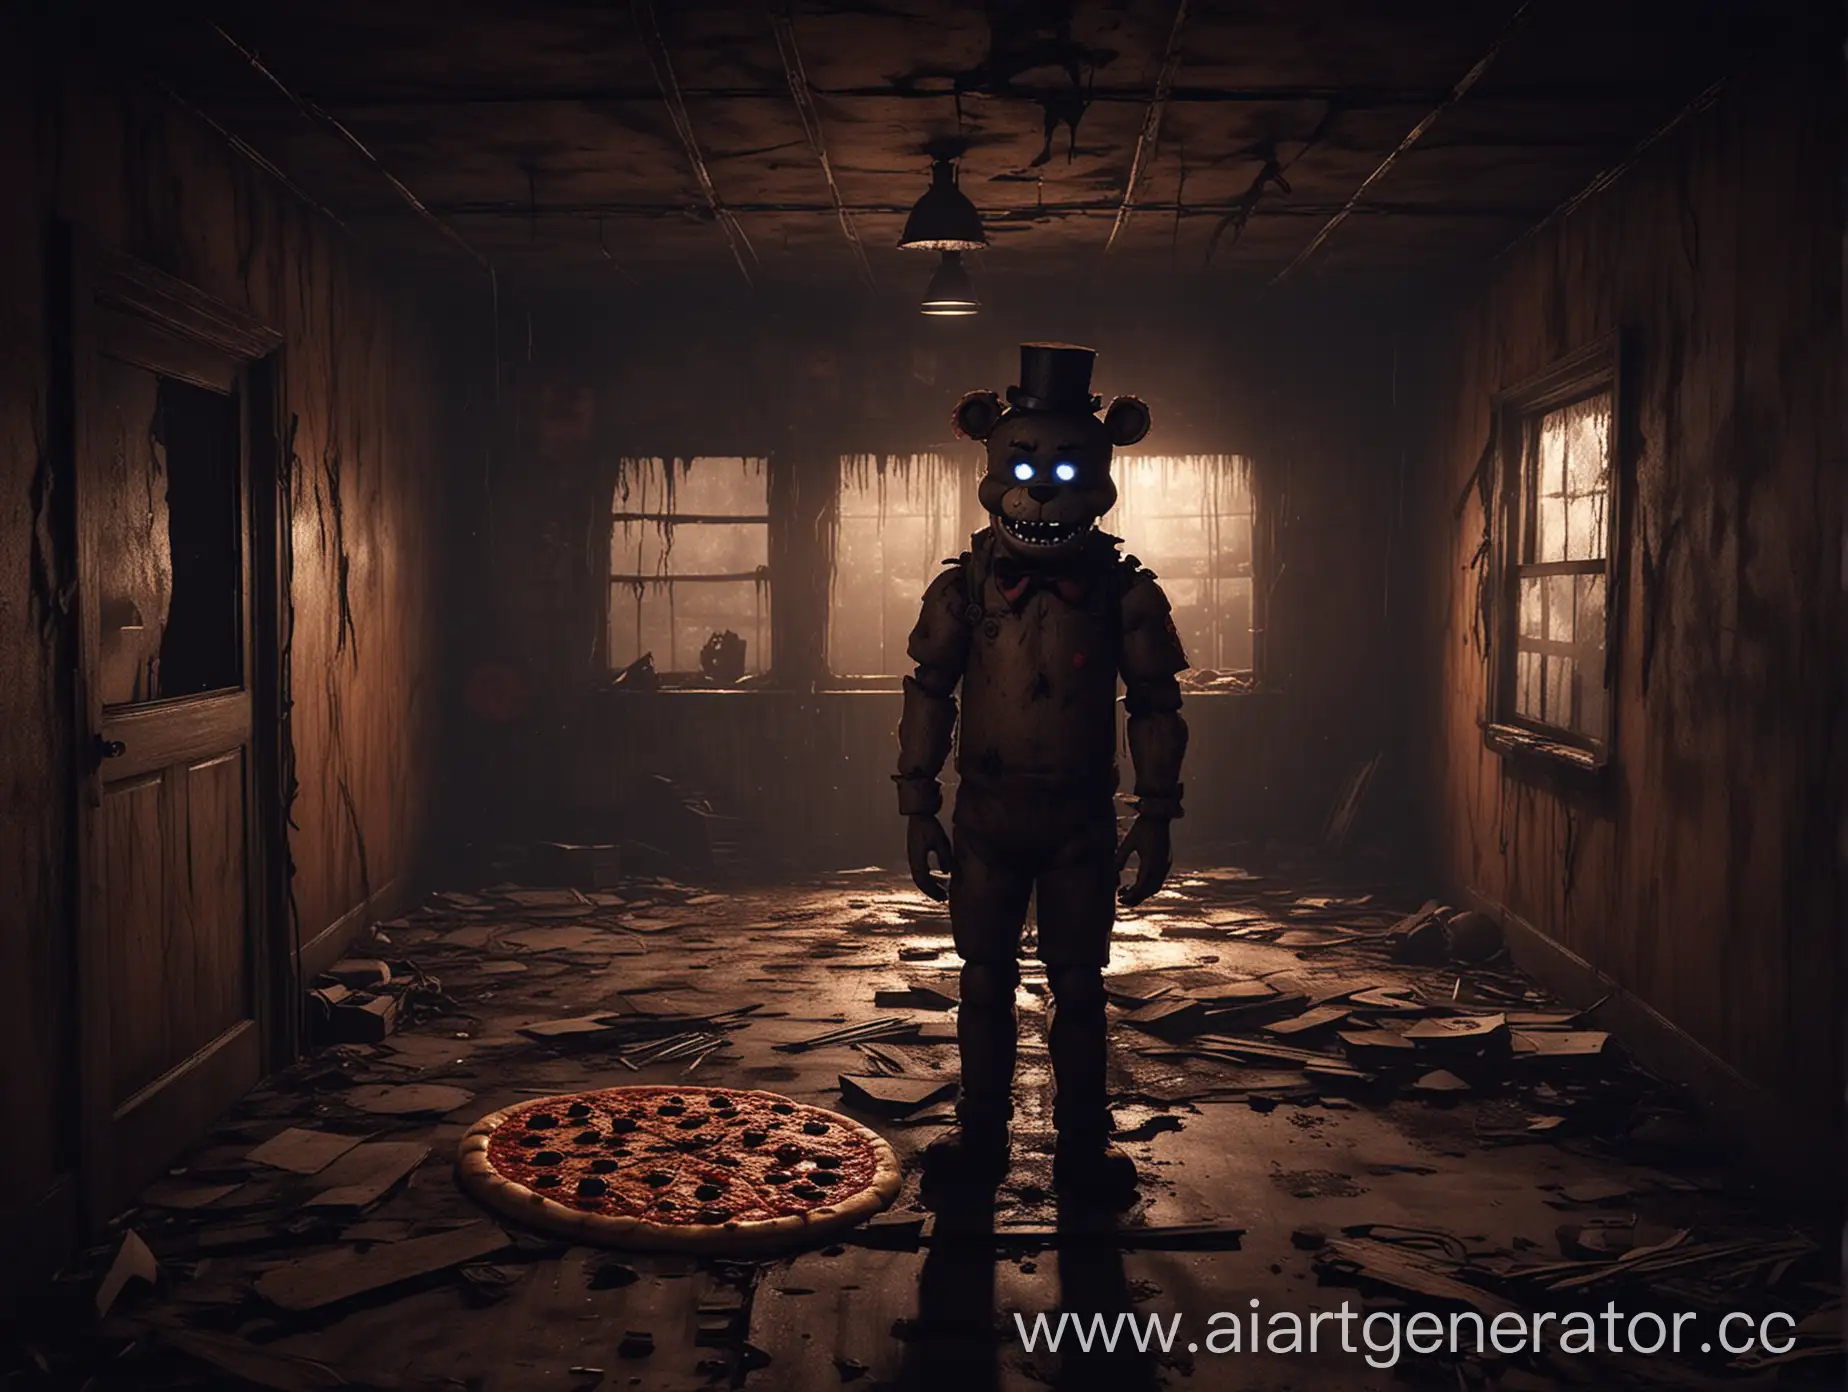 Generate a dark, atmospheric album cover for a horror cinematic music album featuring Bonnie from Five Nights at Freddy’s, standing menacingly in a dilapidated, shadow-filled Freddy Fazbear’s Pizza, with a distorted, eerie background, evoking otherworldly horror and suspense.